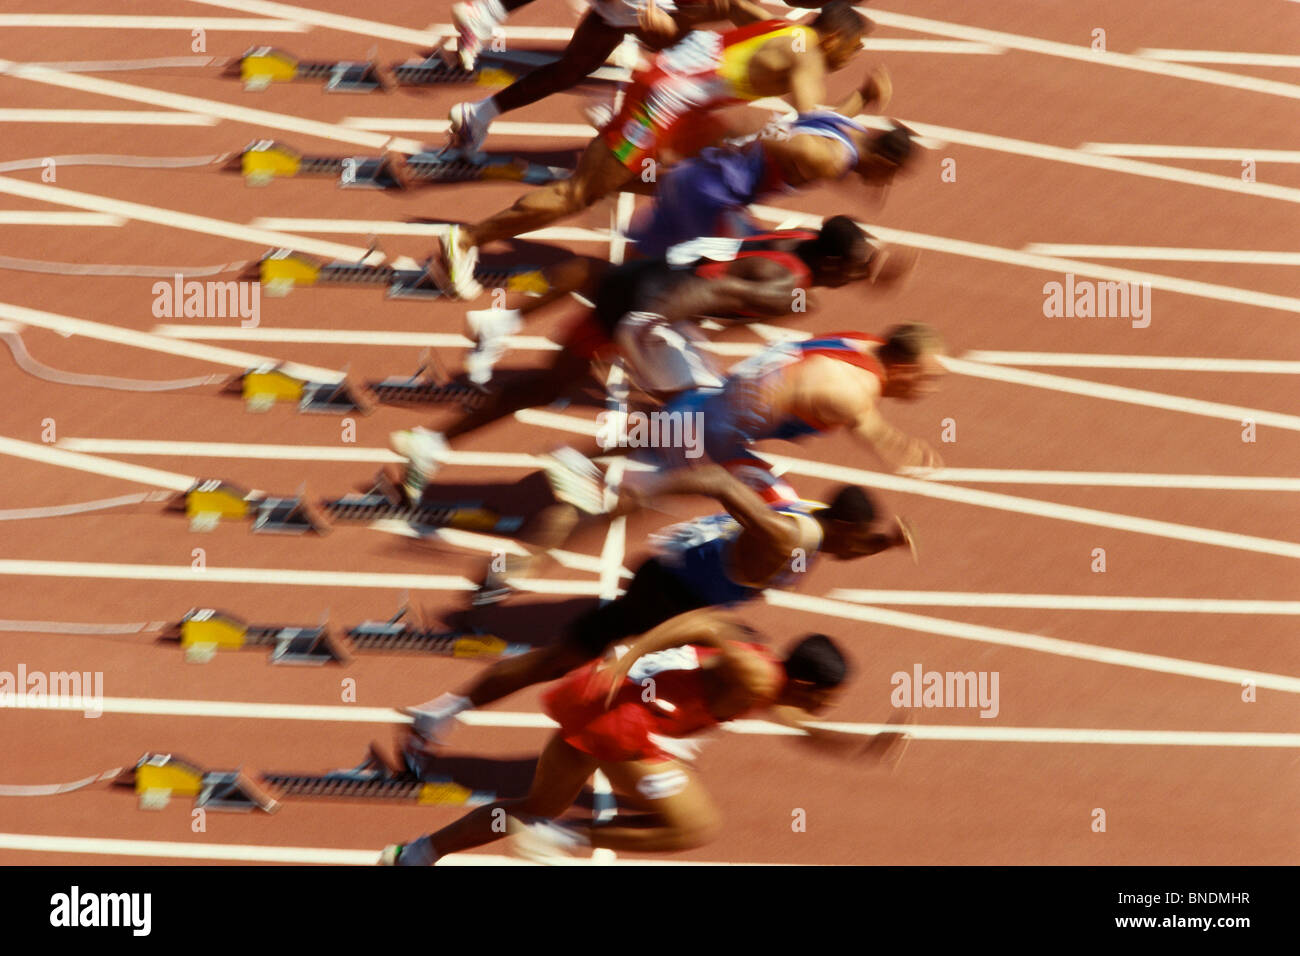 Blurred action of male runners starting a 100 meter sprint race. Stock Photo